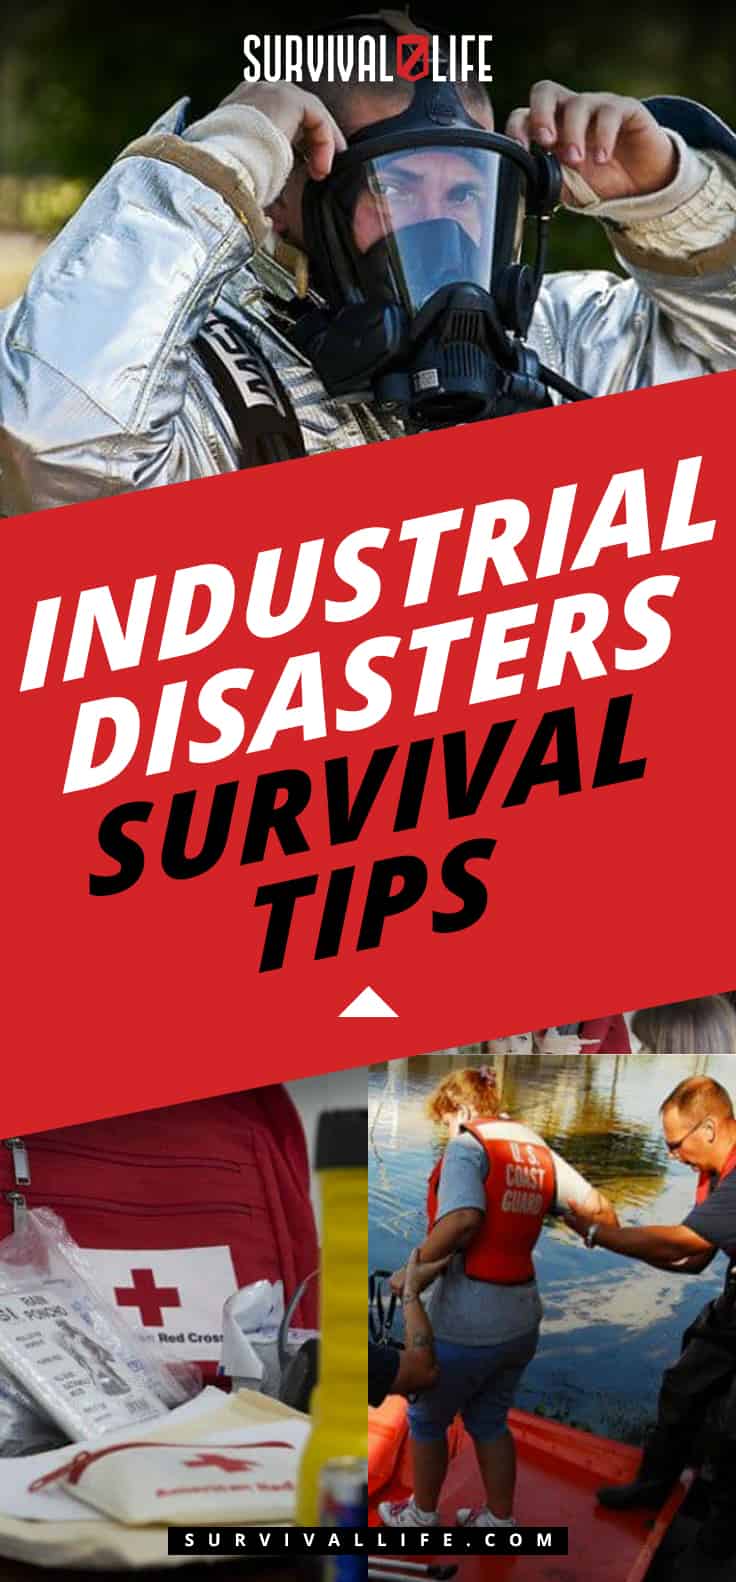 Industrial Disasters Survival Tips | Survival Life